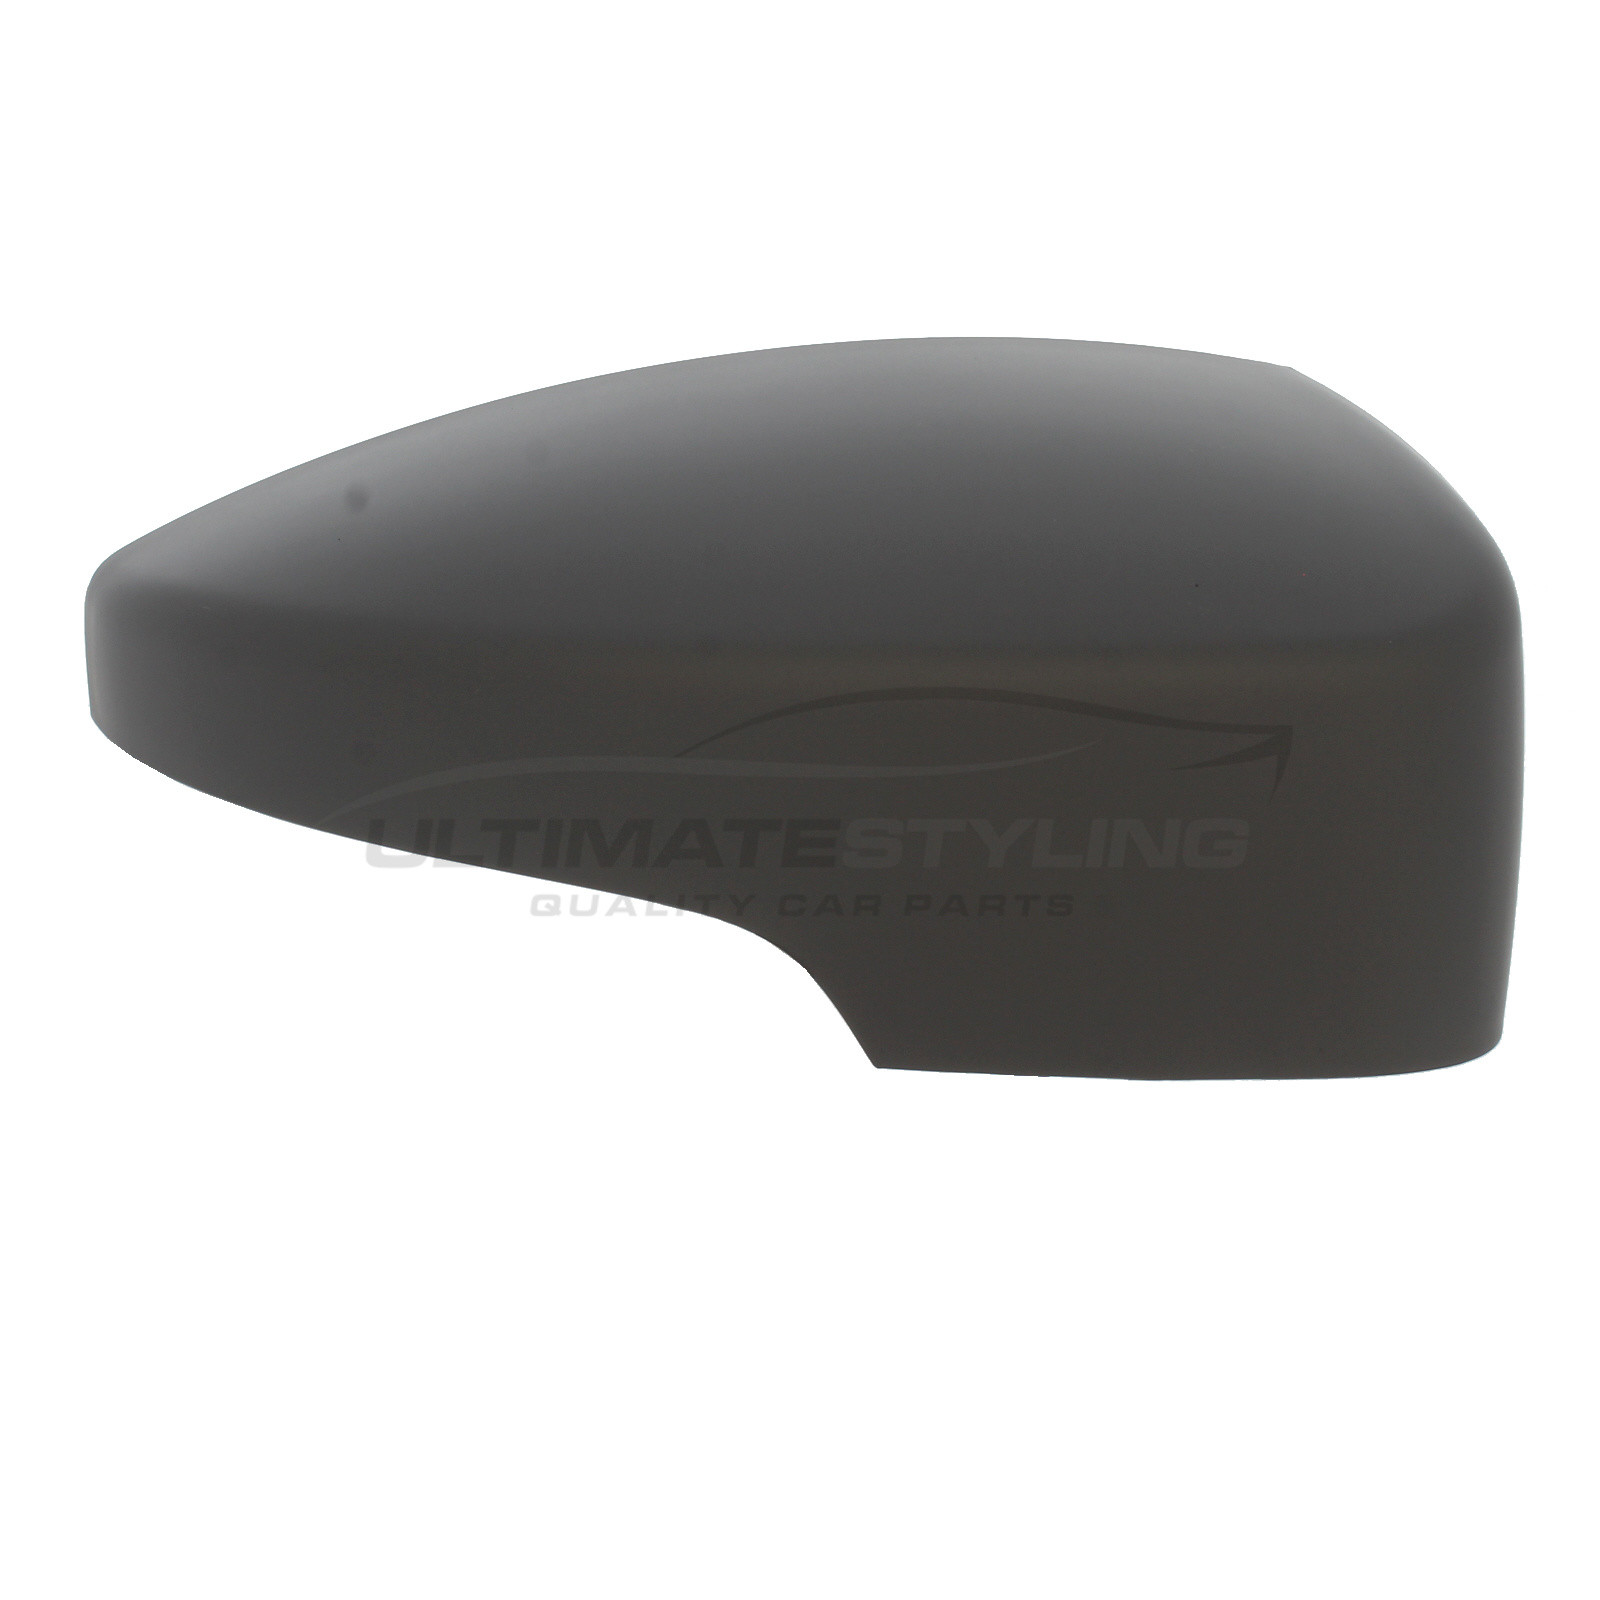 Ford EcoSport 2013-2021, Ford Kuga 2012-2020 Wing Mirror Cover Cap Casing Primed Drivers Side (RH)